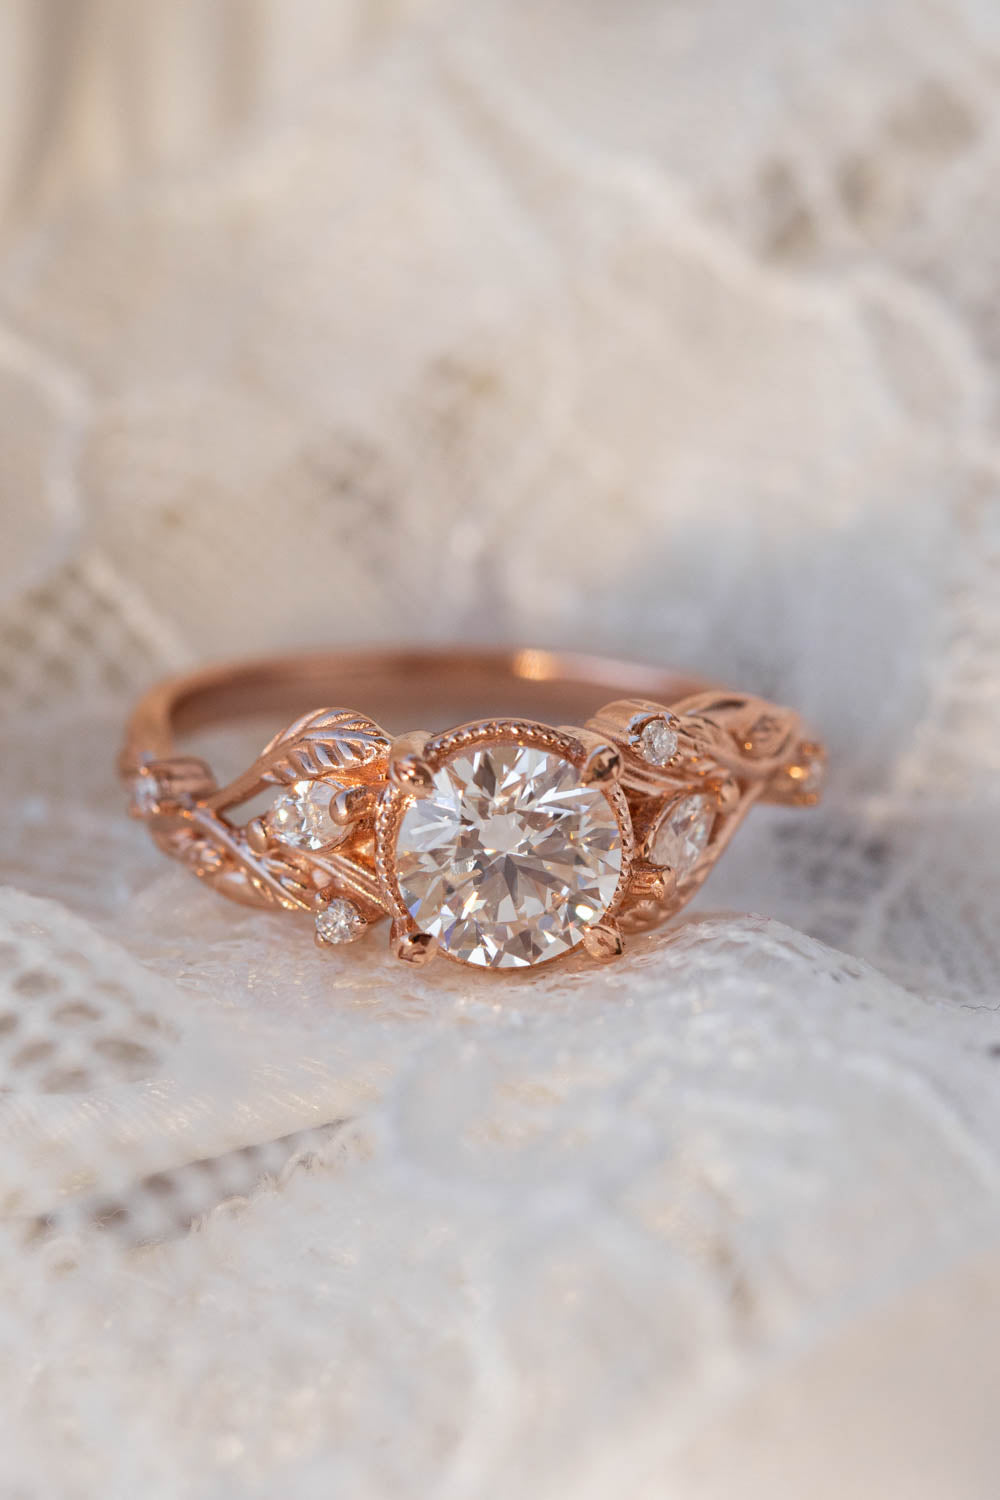 Lab grown diamond engagement ring, rose gold ring with leaves and diamonds / Patricia - Eden Garden Jewelry™